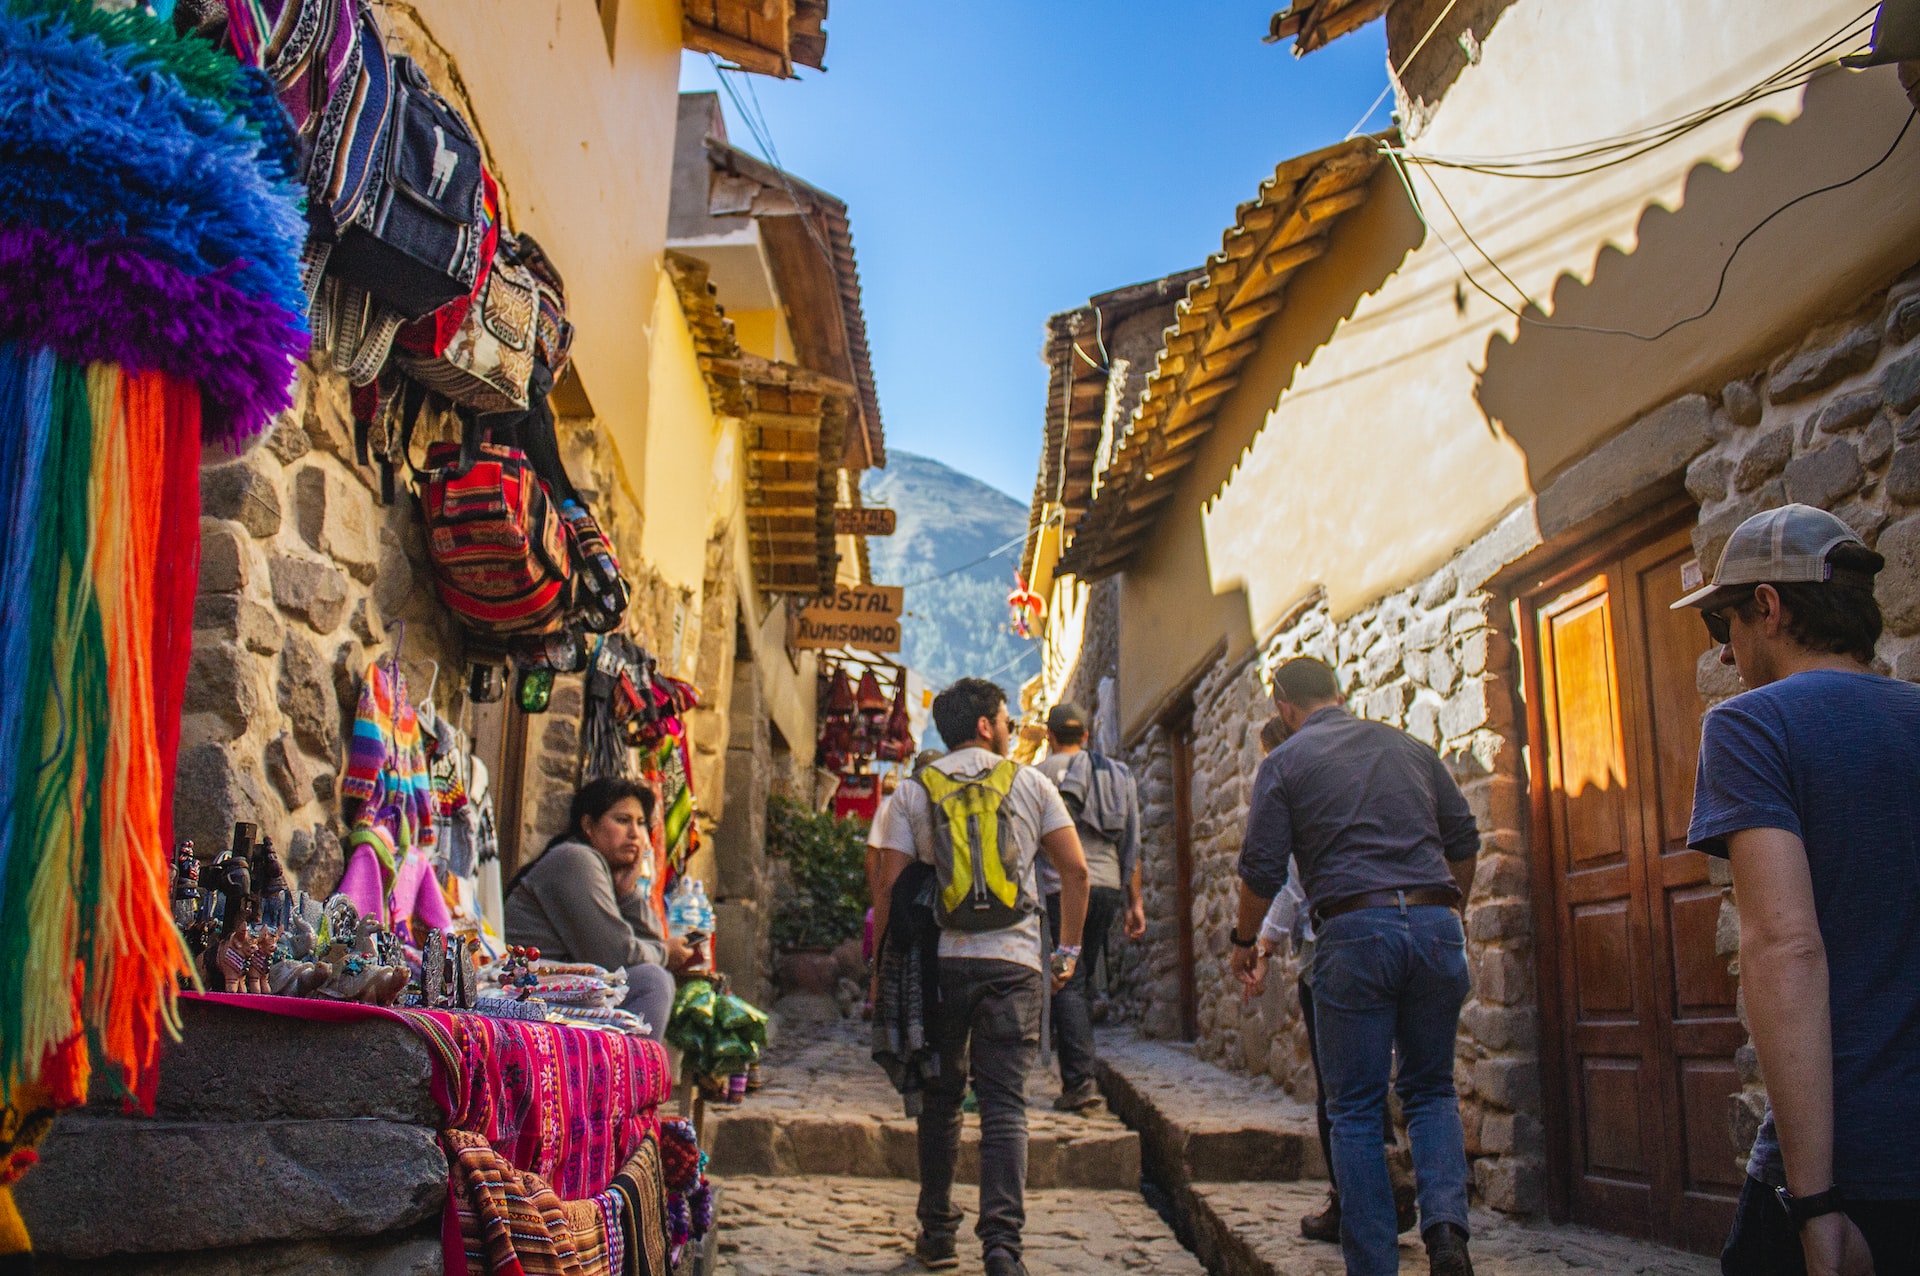 How many days do you need in Cusco?